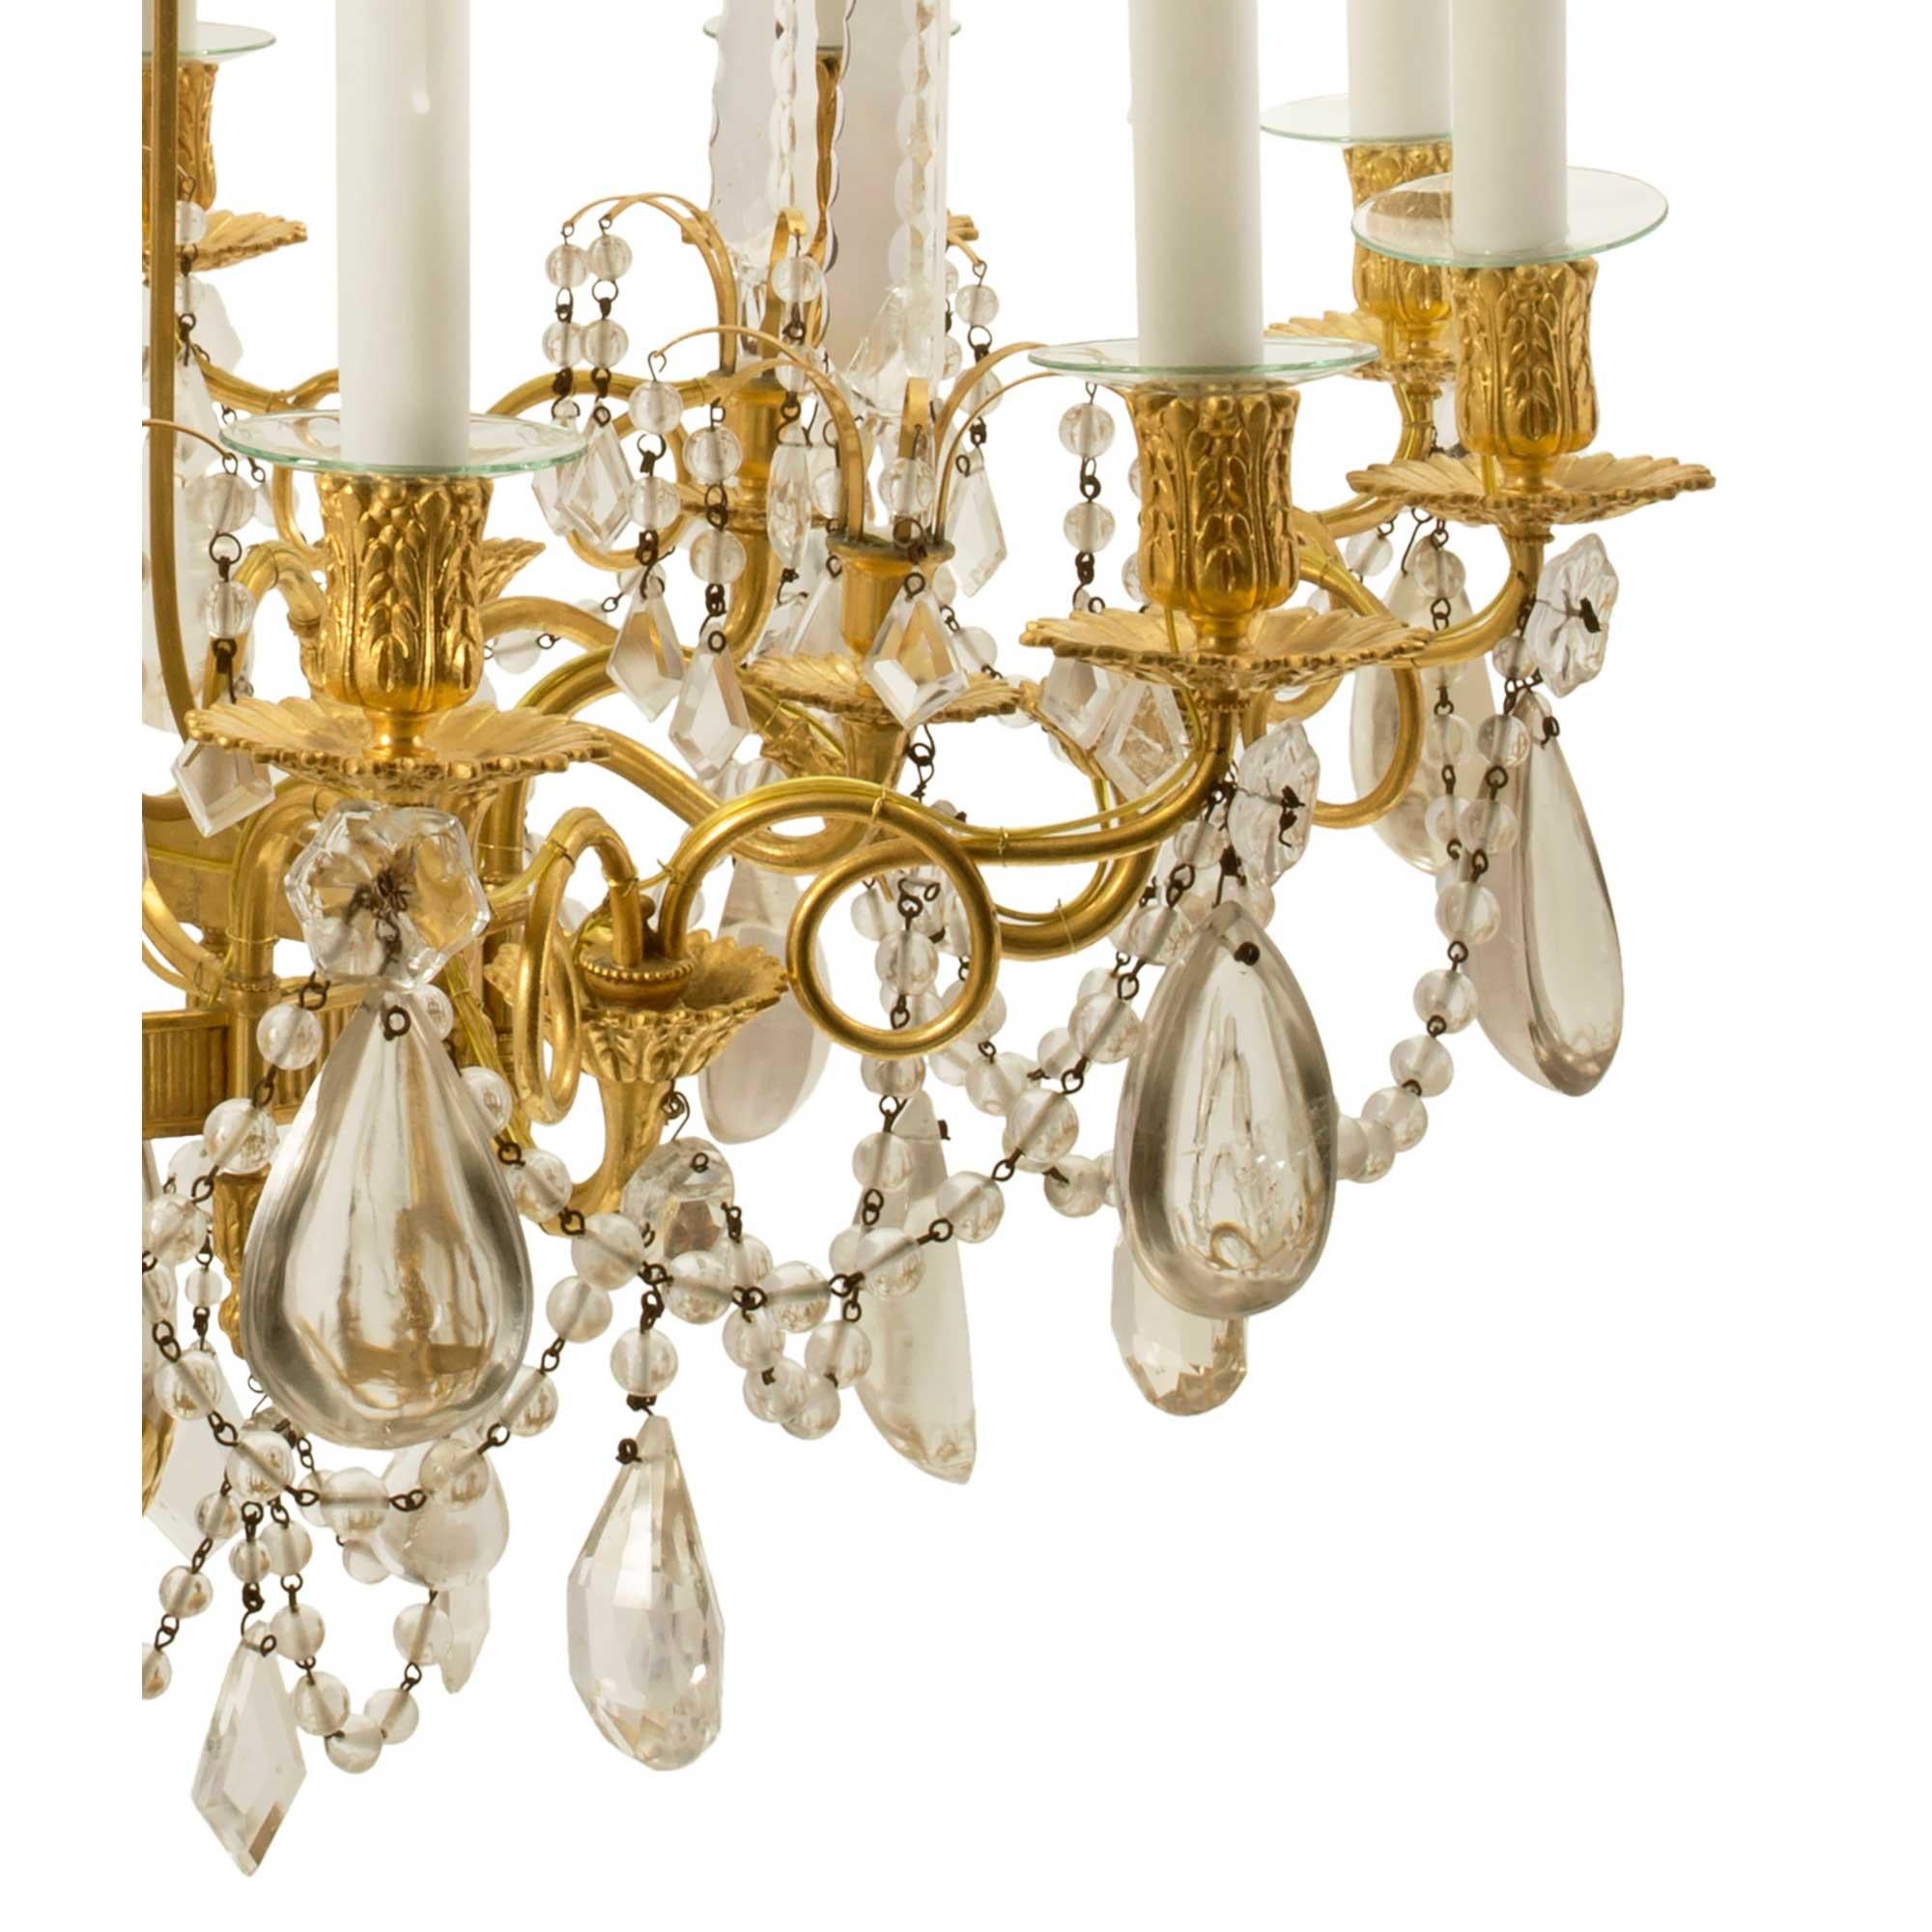 Russian Imperial 19th Century Neoclassical Style Rock Crystal Chandelier For Sale 2